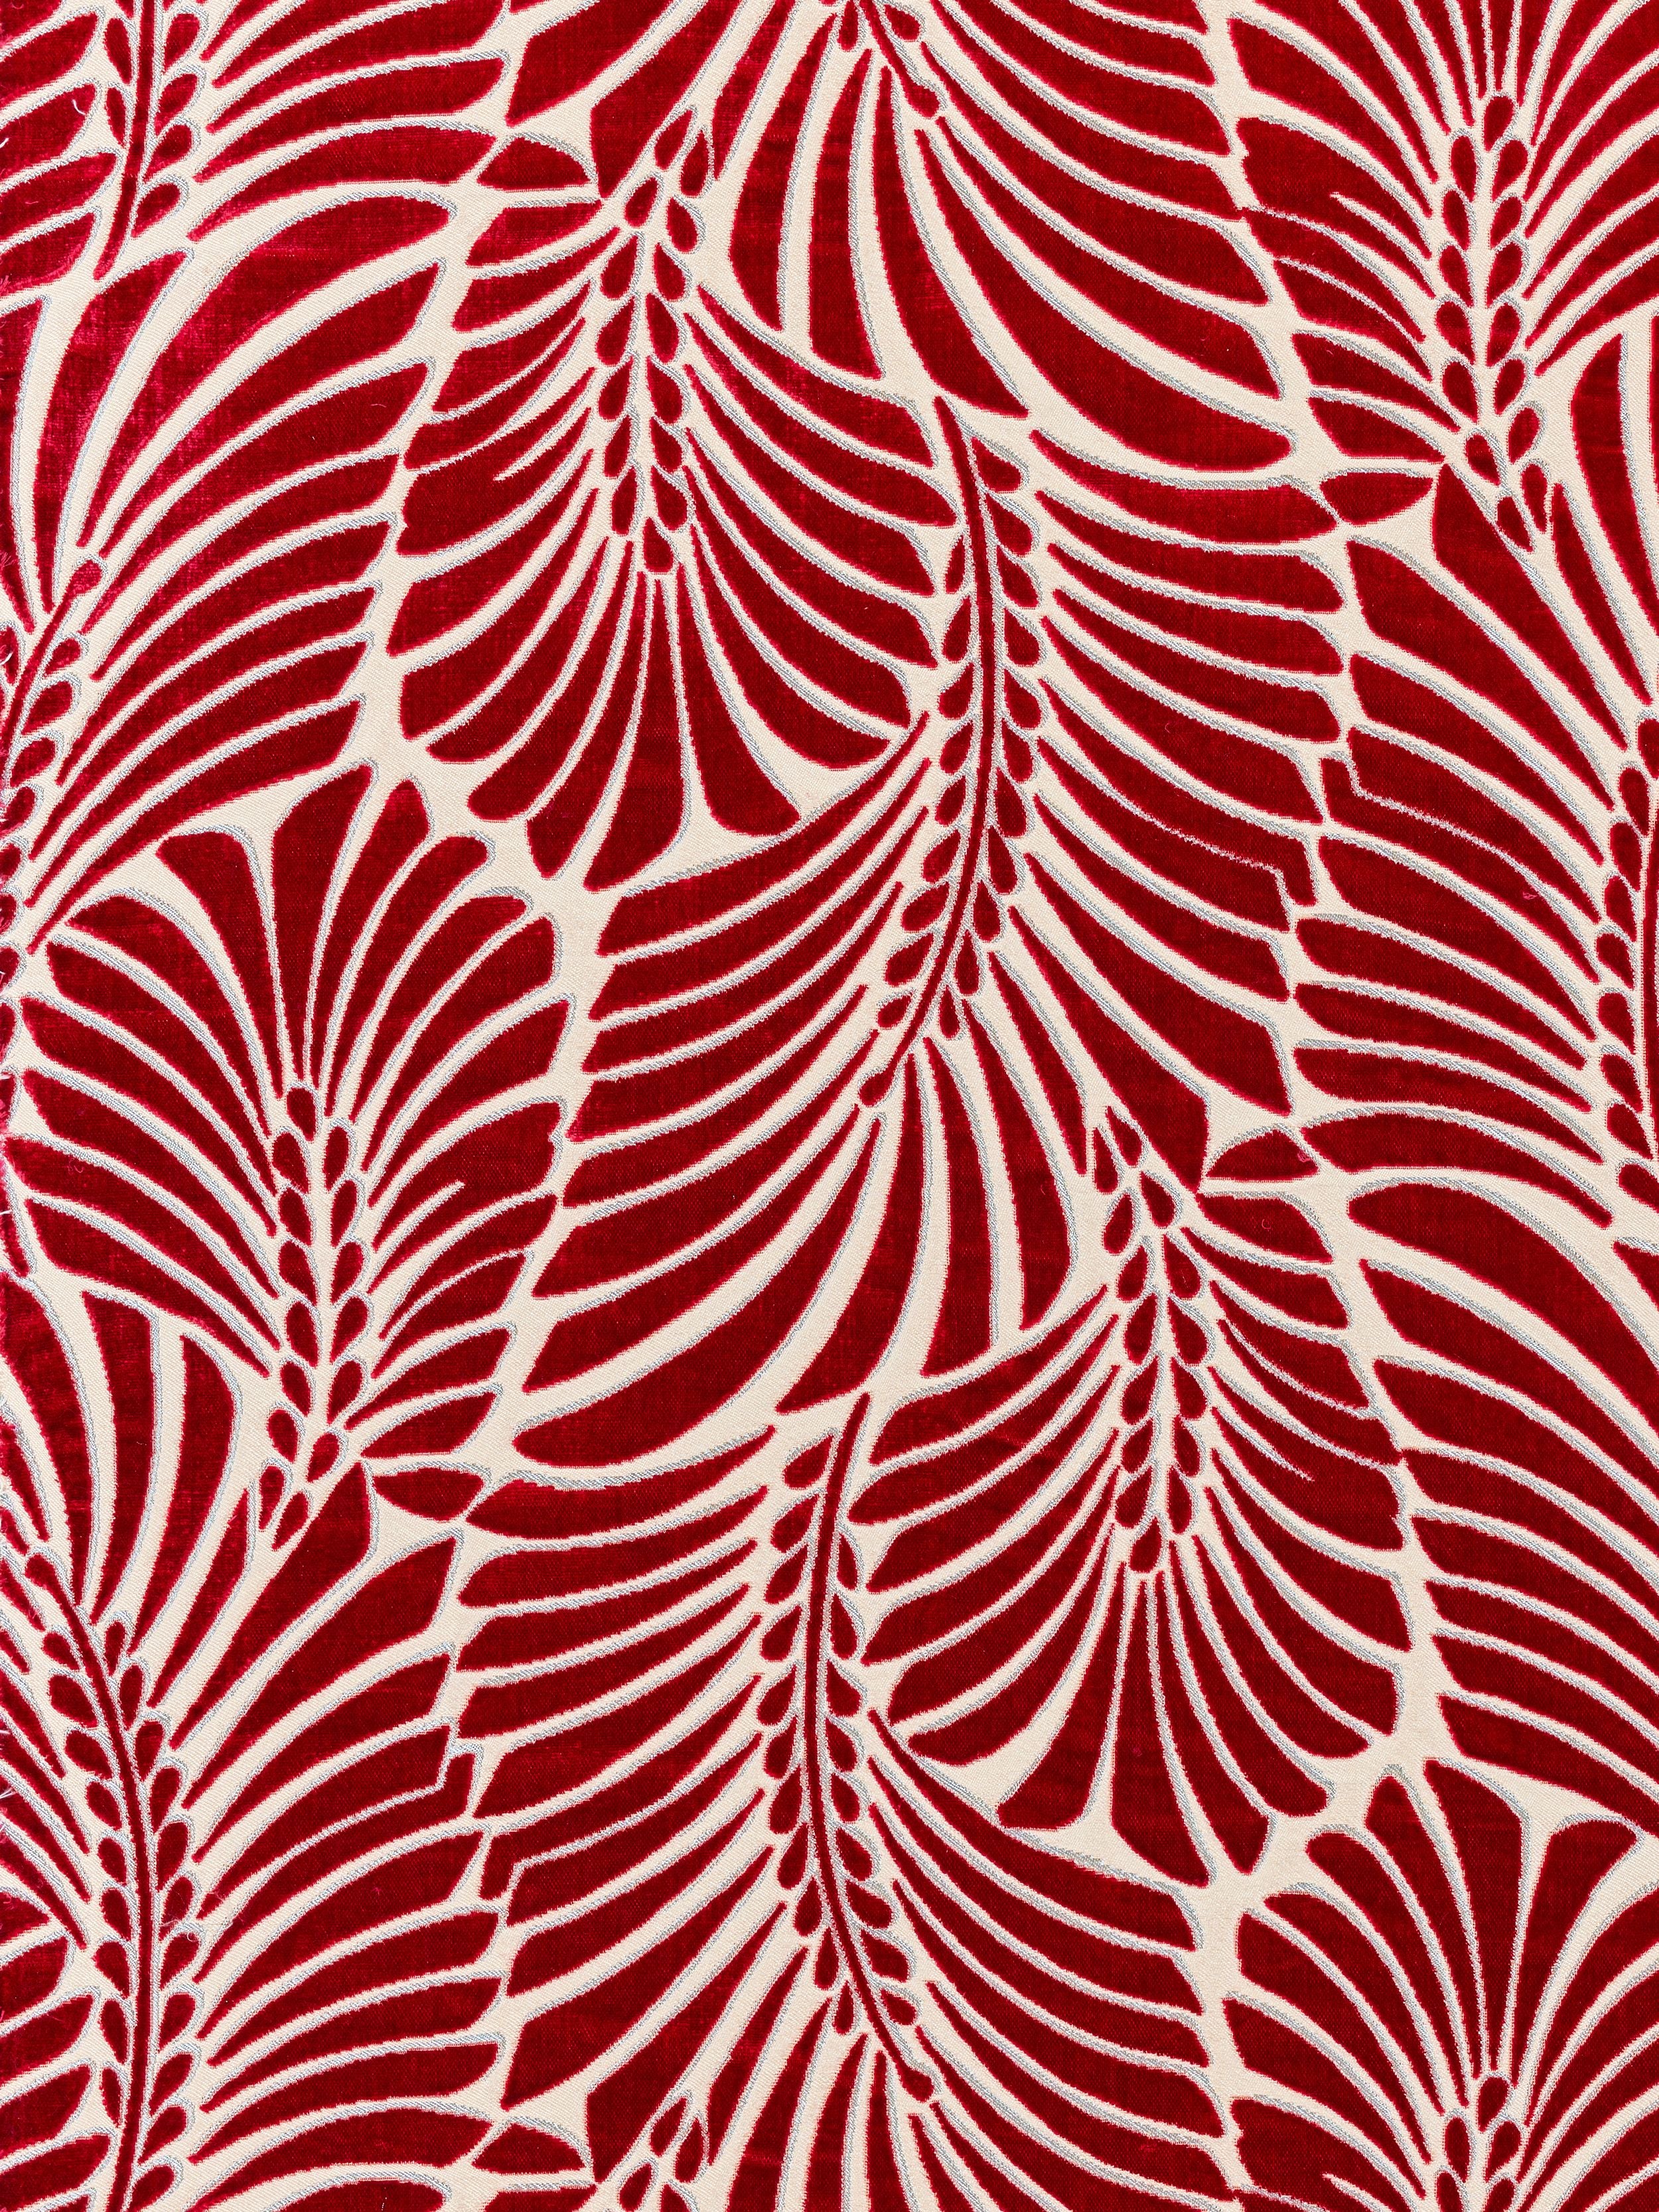 Plumes Silk Velvet fabric in cerise color - pattern number CN 00031523 - by Scalamandre in the Old World Weavers collection